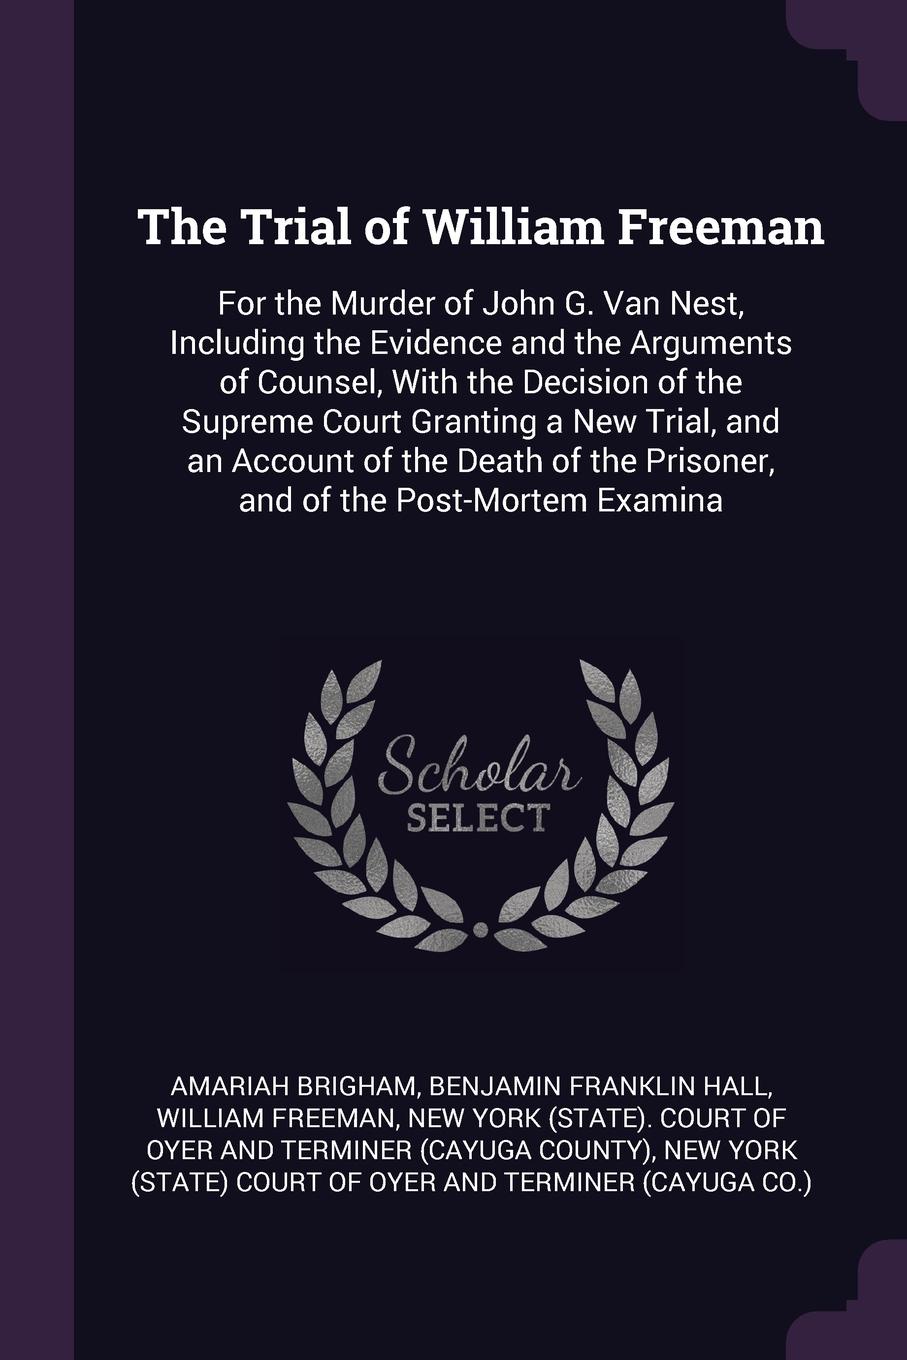 The Trial of William Freeman. For the Murder of John G. Van Nest, Including the Evidence and the Arguments of Counsel, With the Decision of the Supreme Court Granting a New Trial, and an Account of the Death of the Prisoner, and of the Post-Mortem...